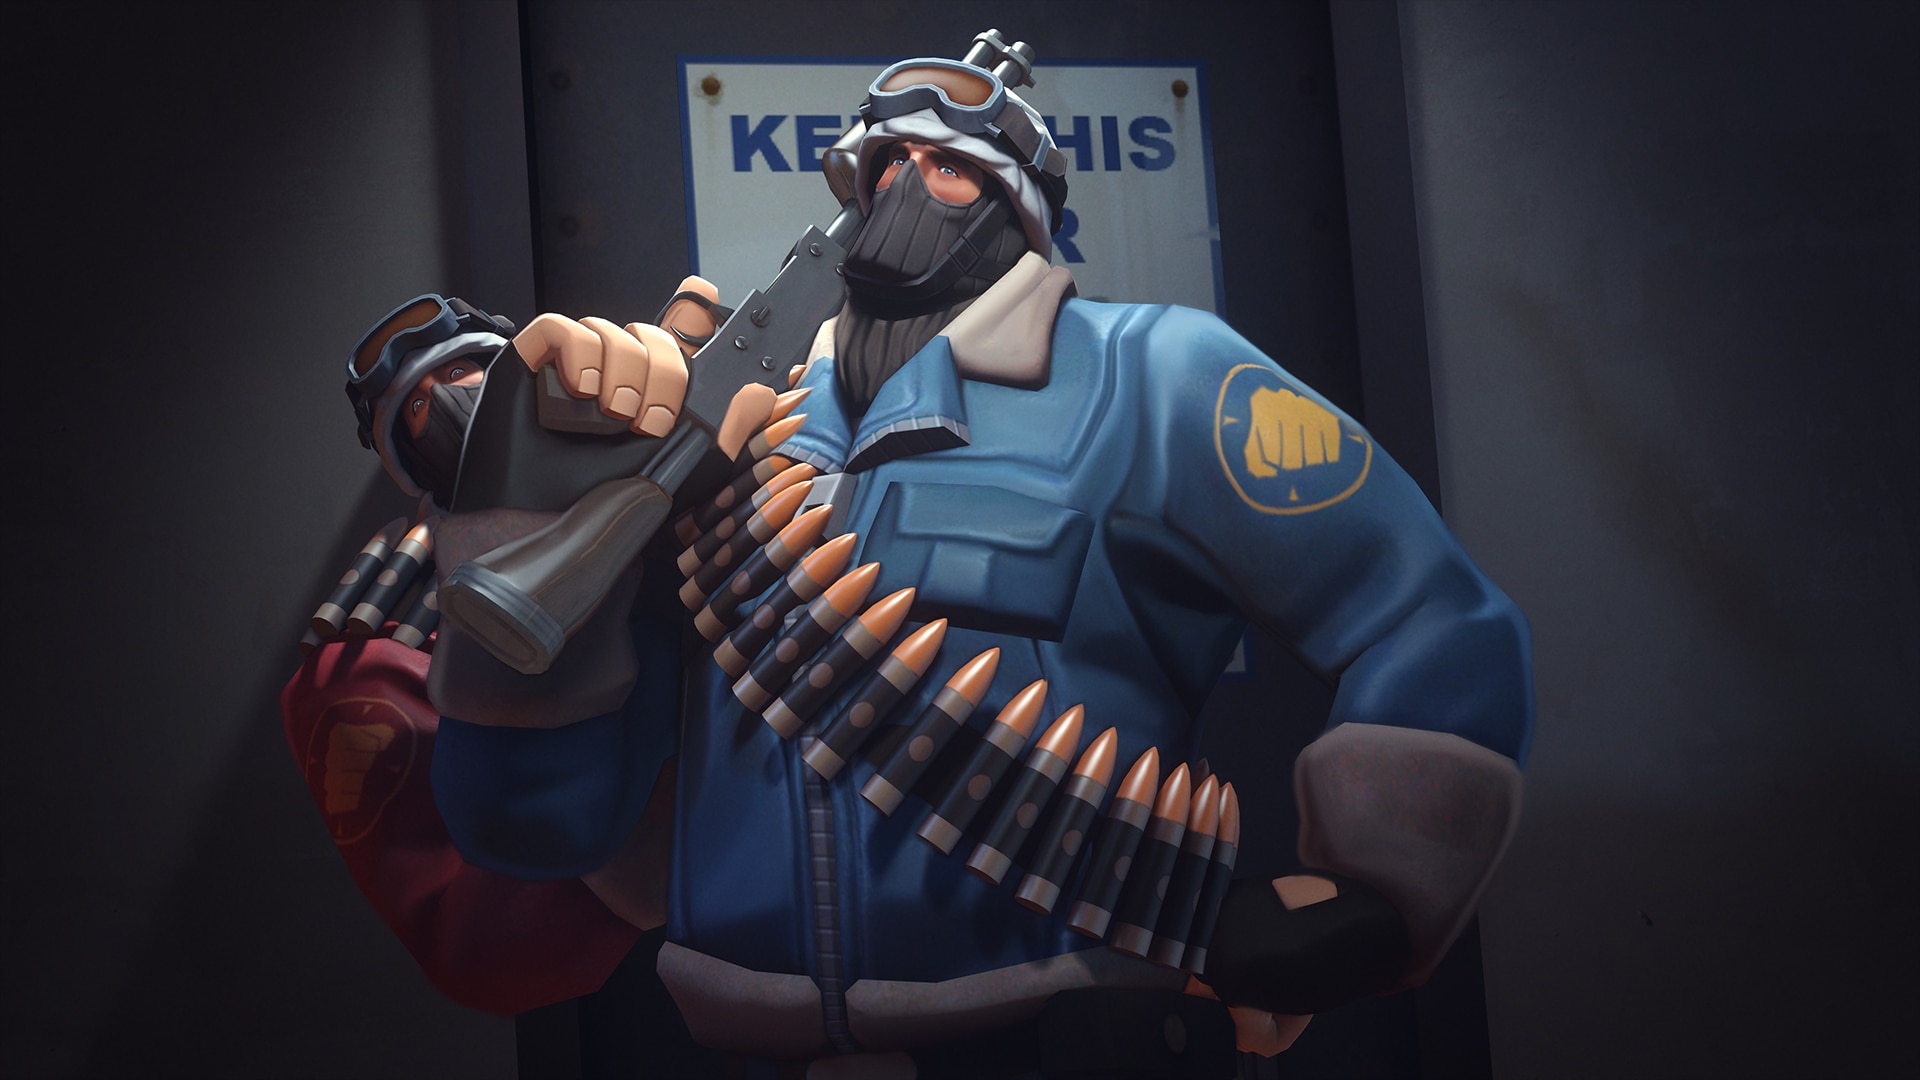 Tf2 avatars for steam фото 74